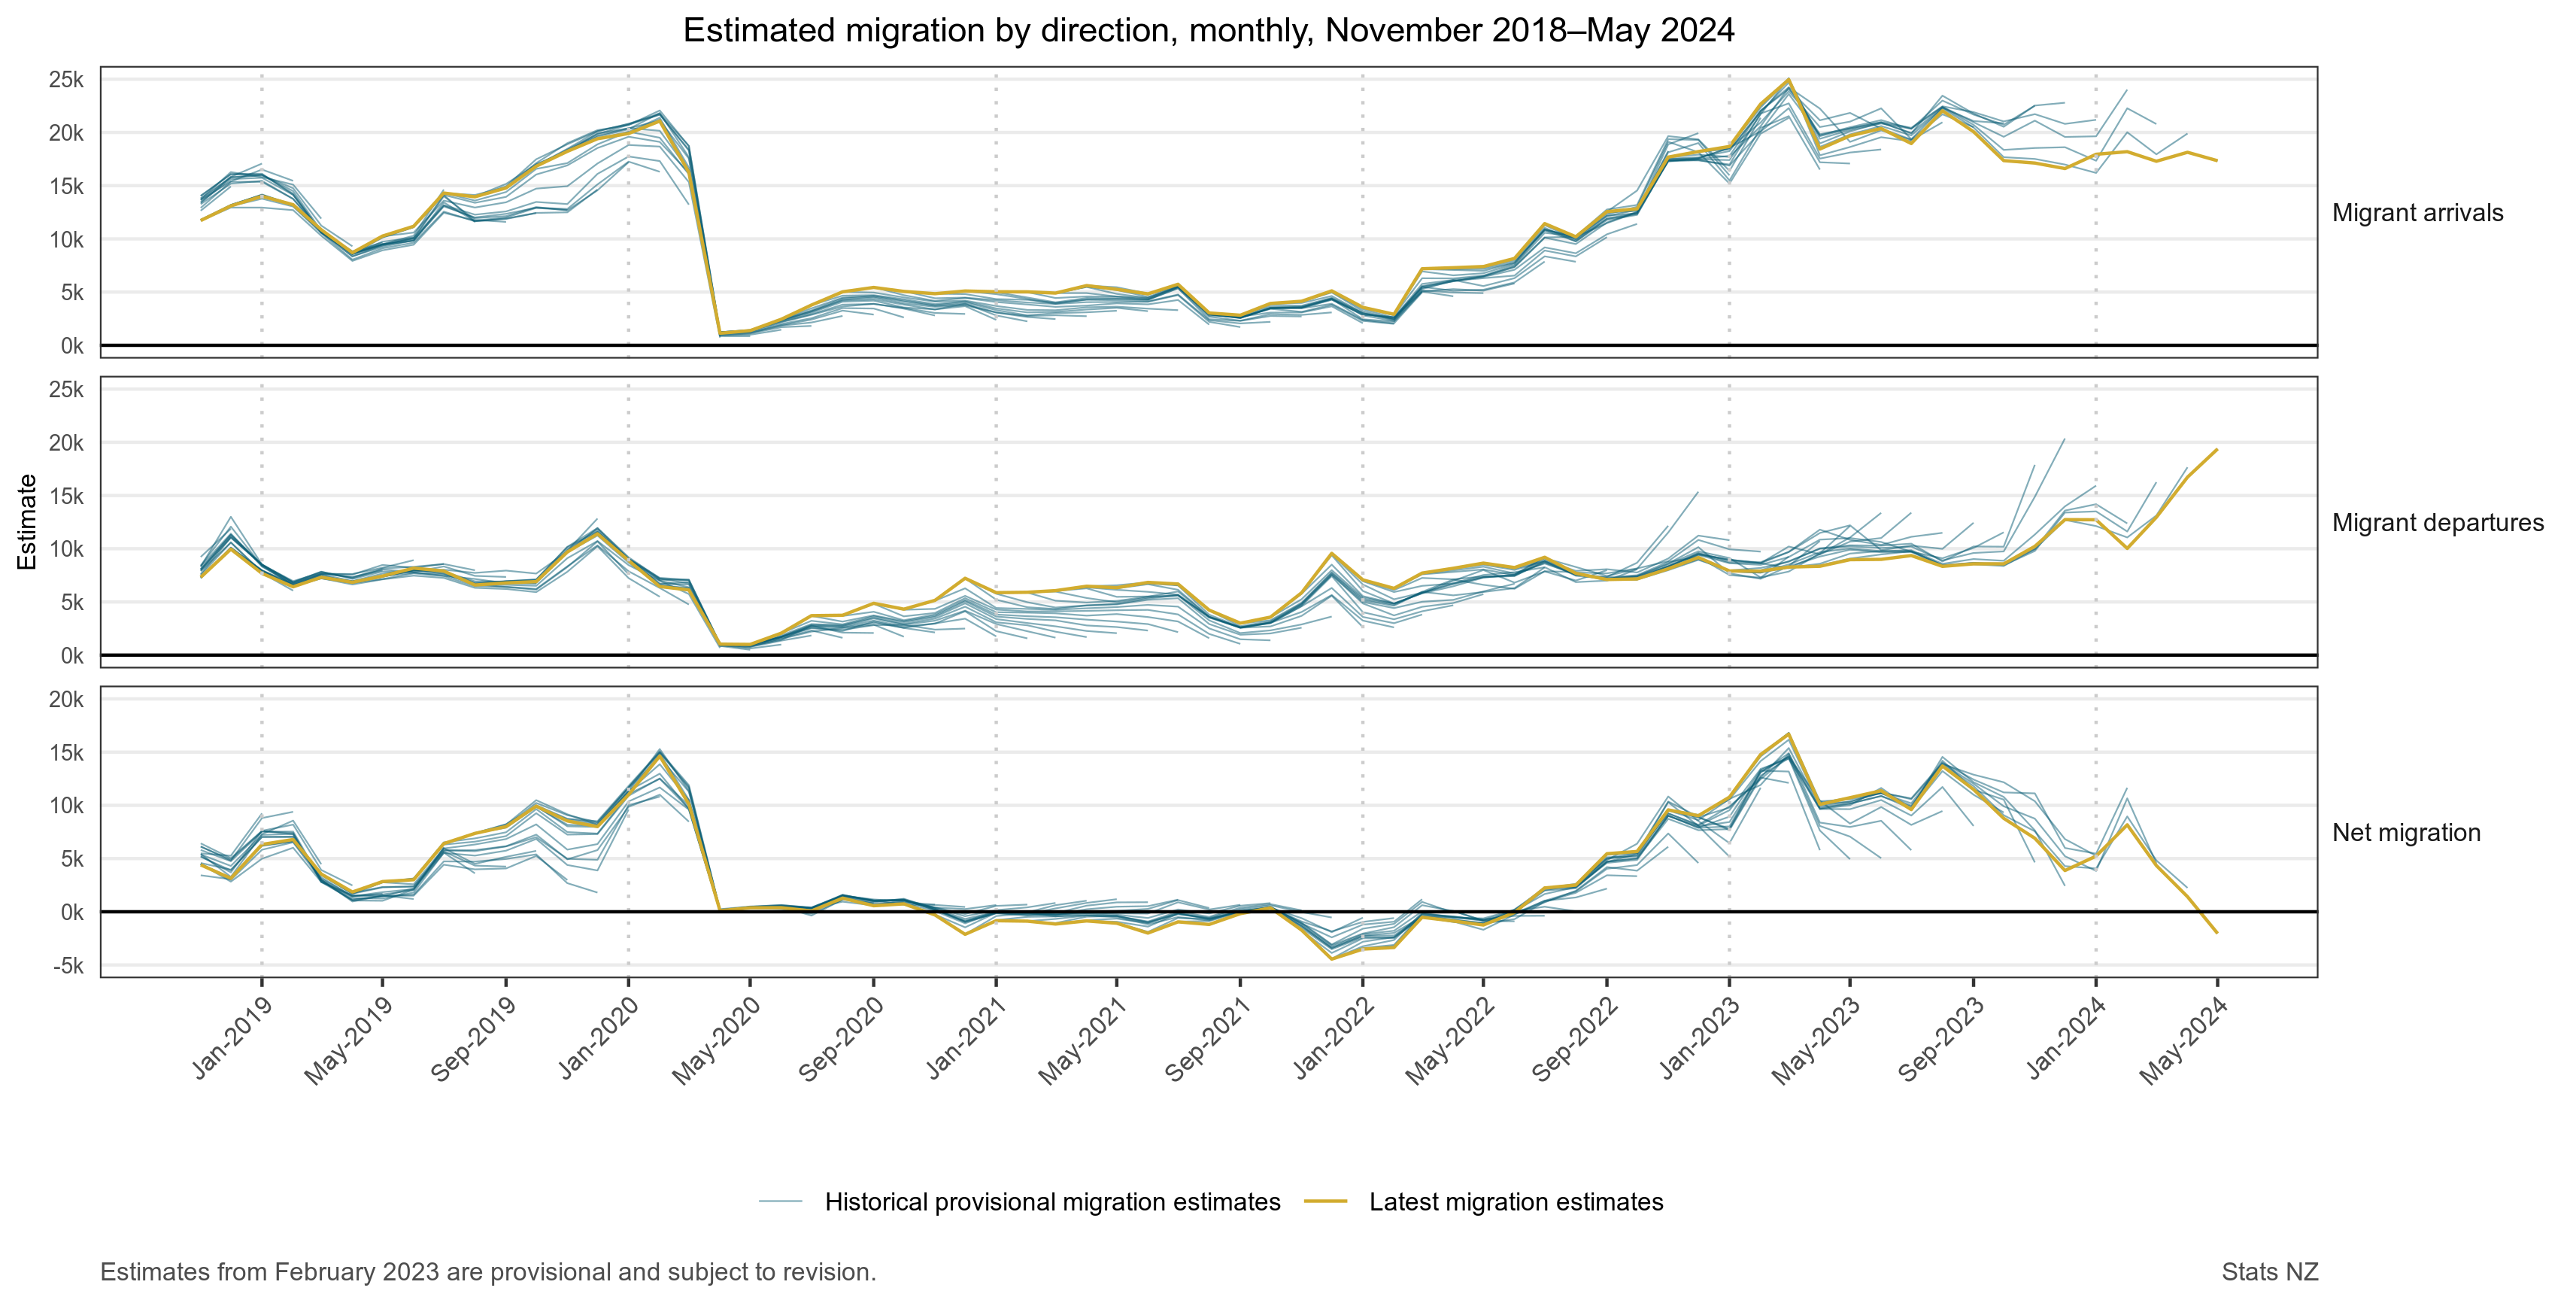 Graph of estimated migration by direction, monthly, November 2018 to May 2024. See link to text alternative under image. 